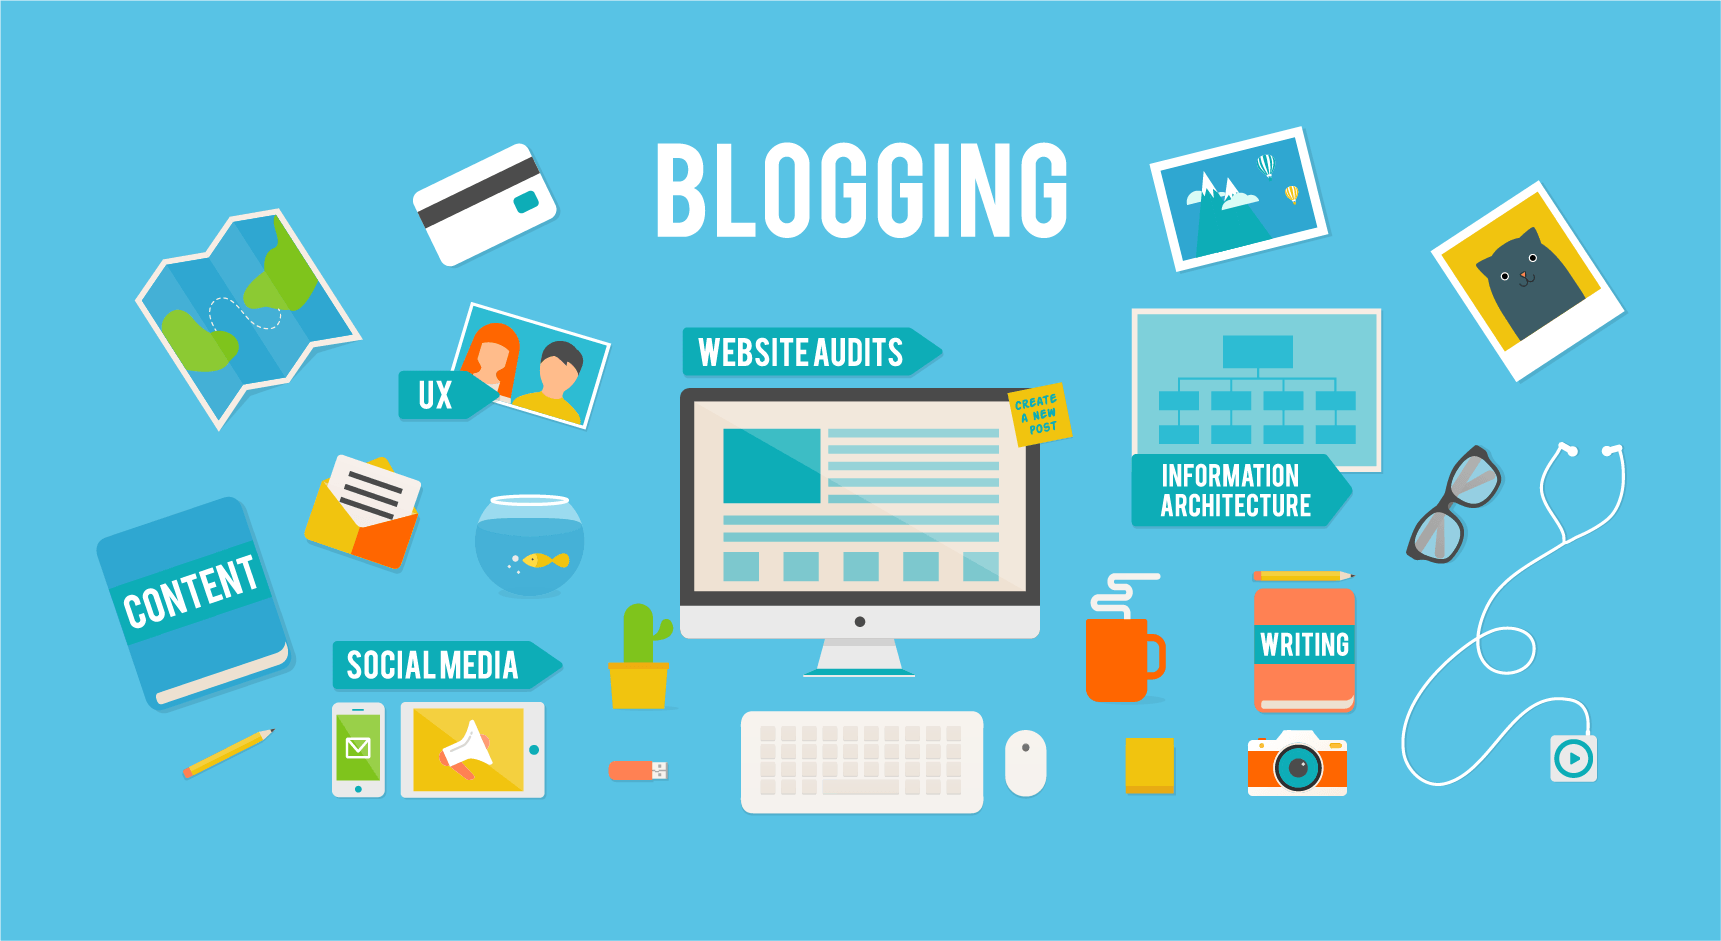 business blogging as an equalizer for small and medium businesses - act-on